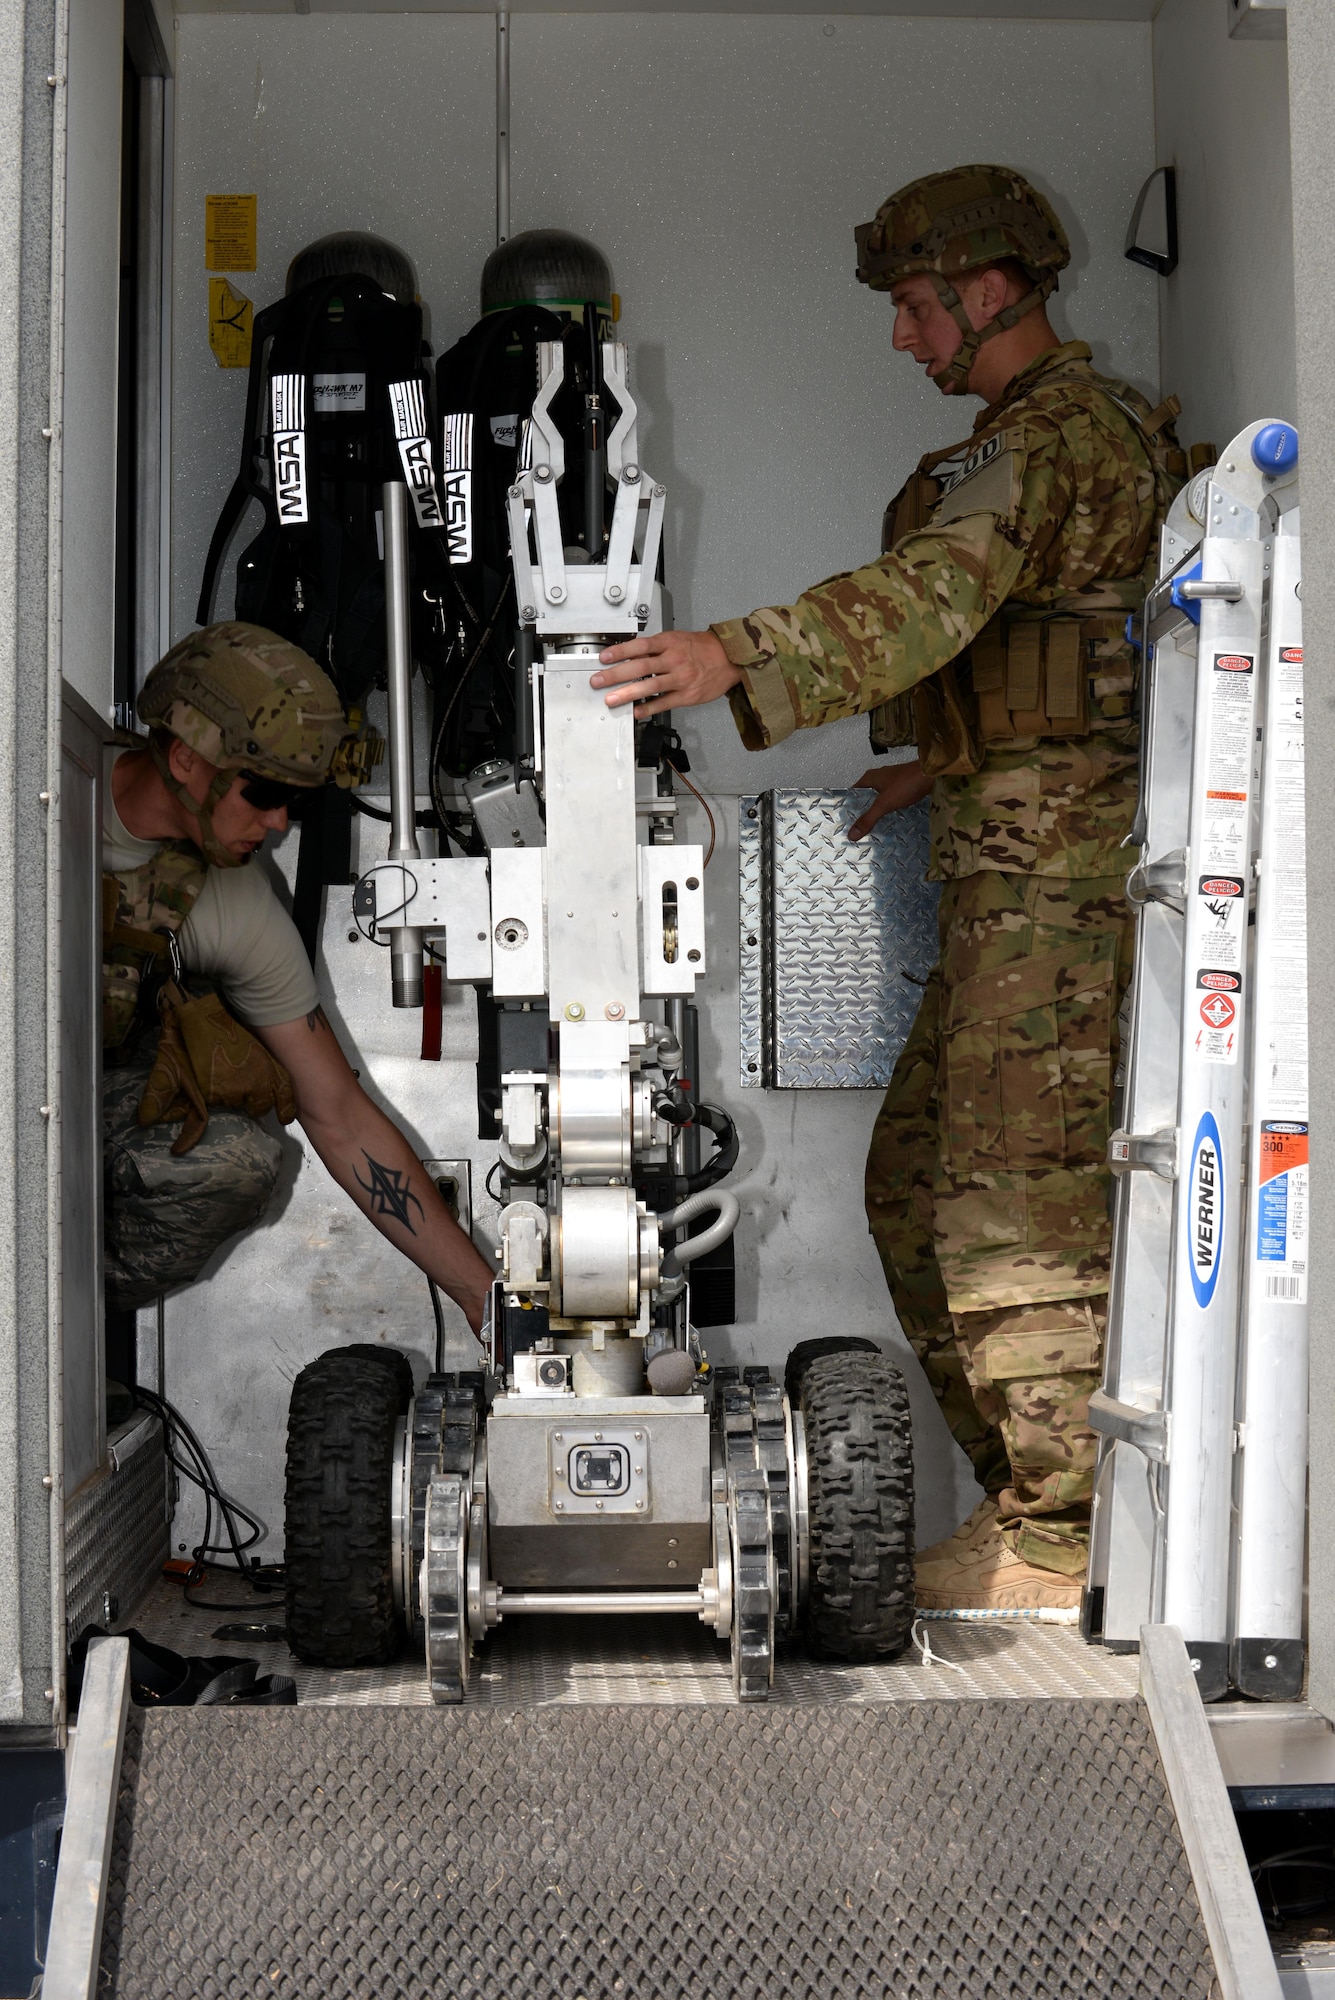 Members of the 28th Civil Engineer Squadron explosive ordnance disposal flight prepare to deploy an F-6/A robot during an exercise at Ellsworth Air Force Base, S.D., June 7, 2017. EOD responded to a simulated terrorist attack and used the robot to search and detonate a simulated explosive device during the exercise. (U.S. Air Force photo by Staff Sgt. Hailey Staker)